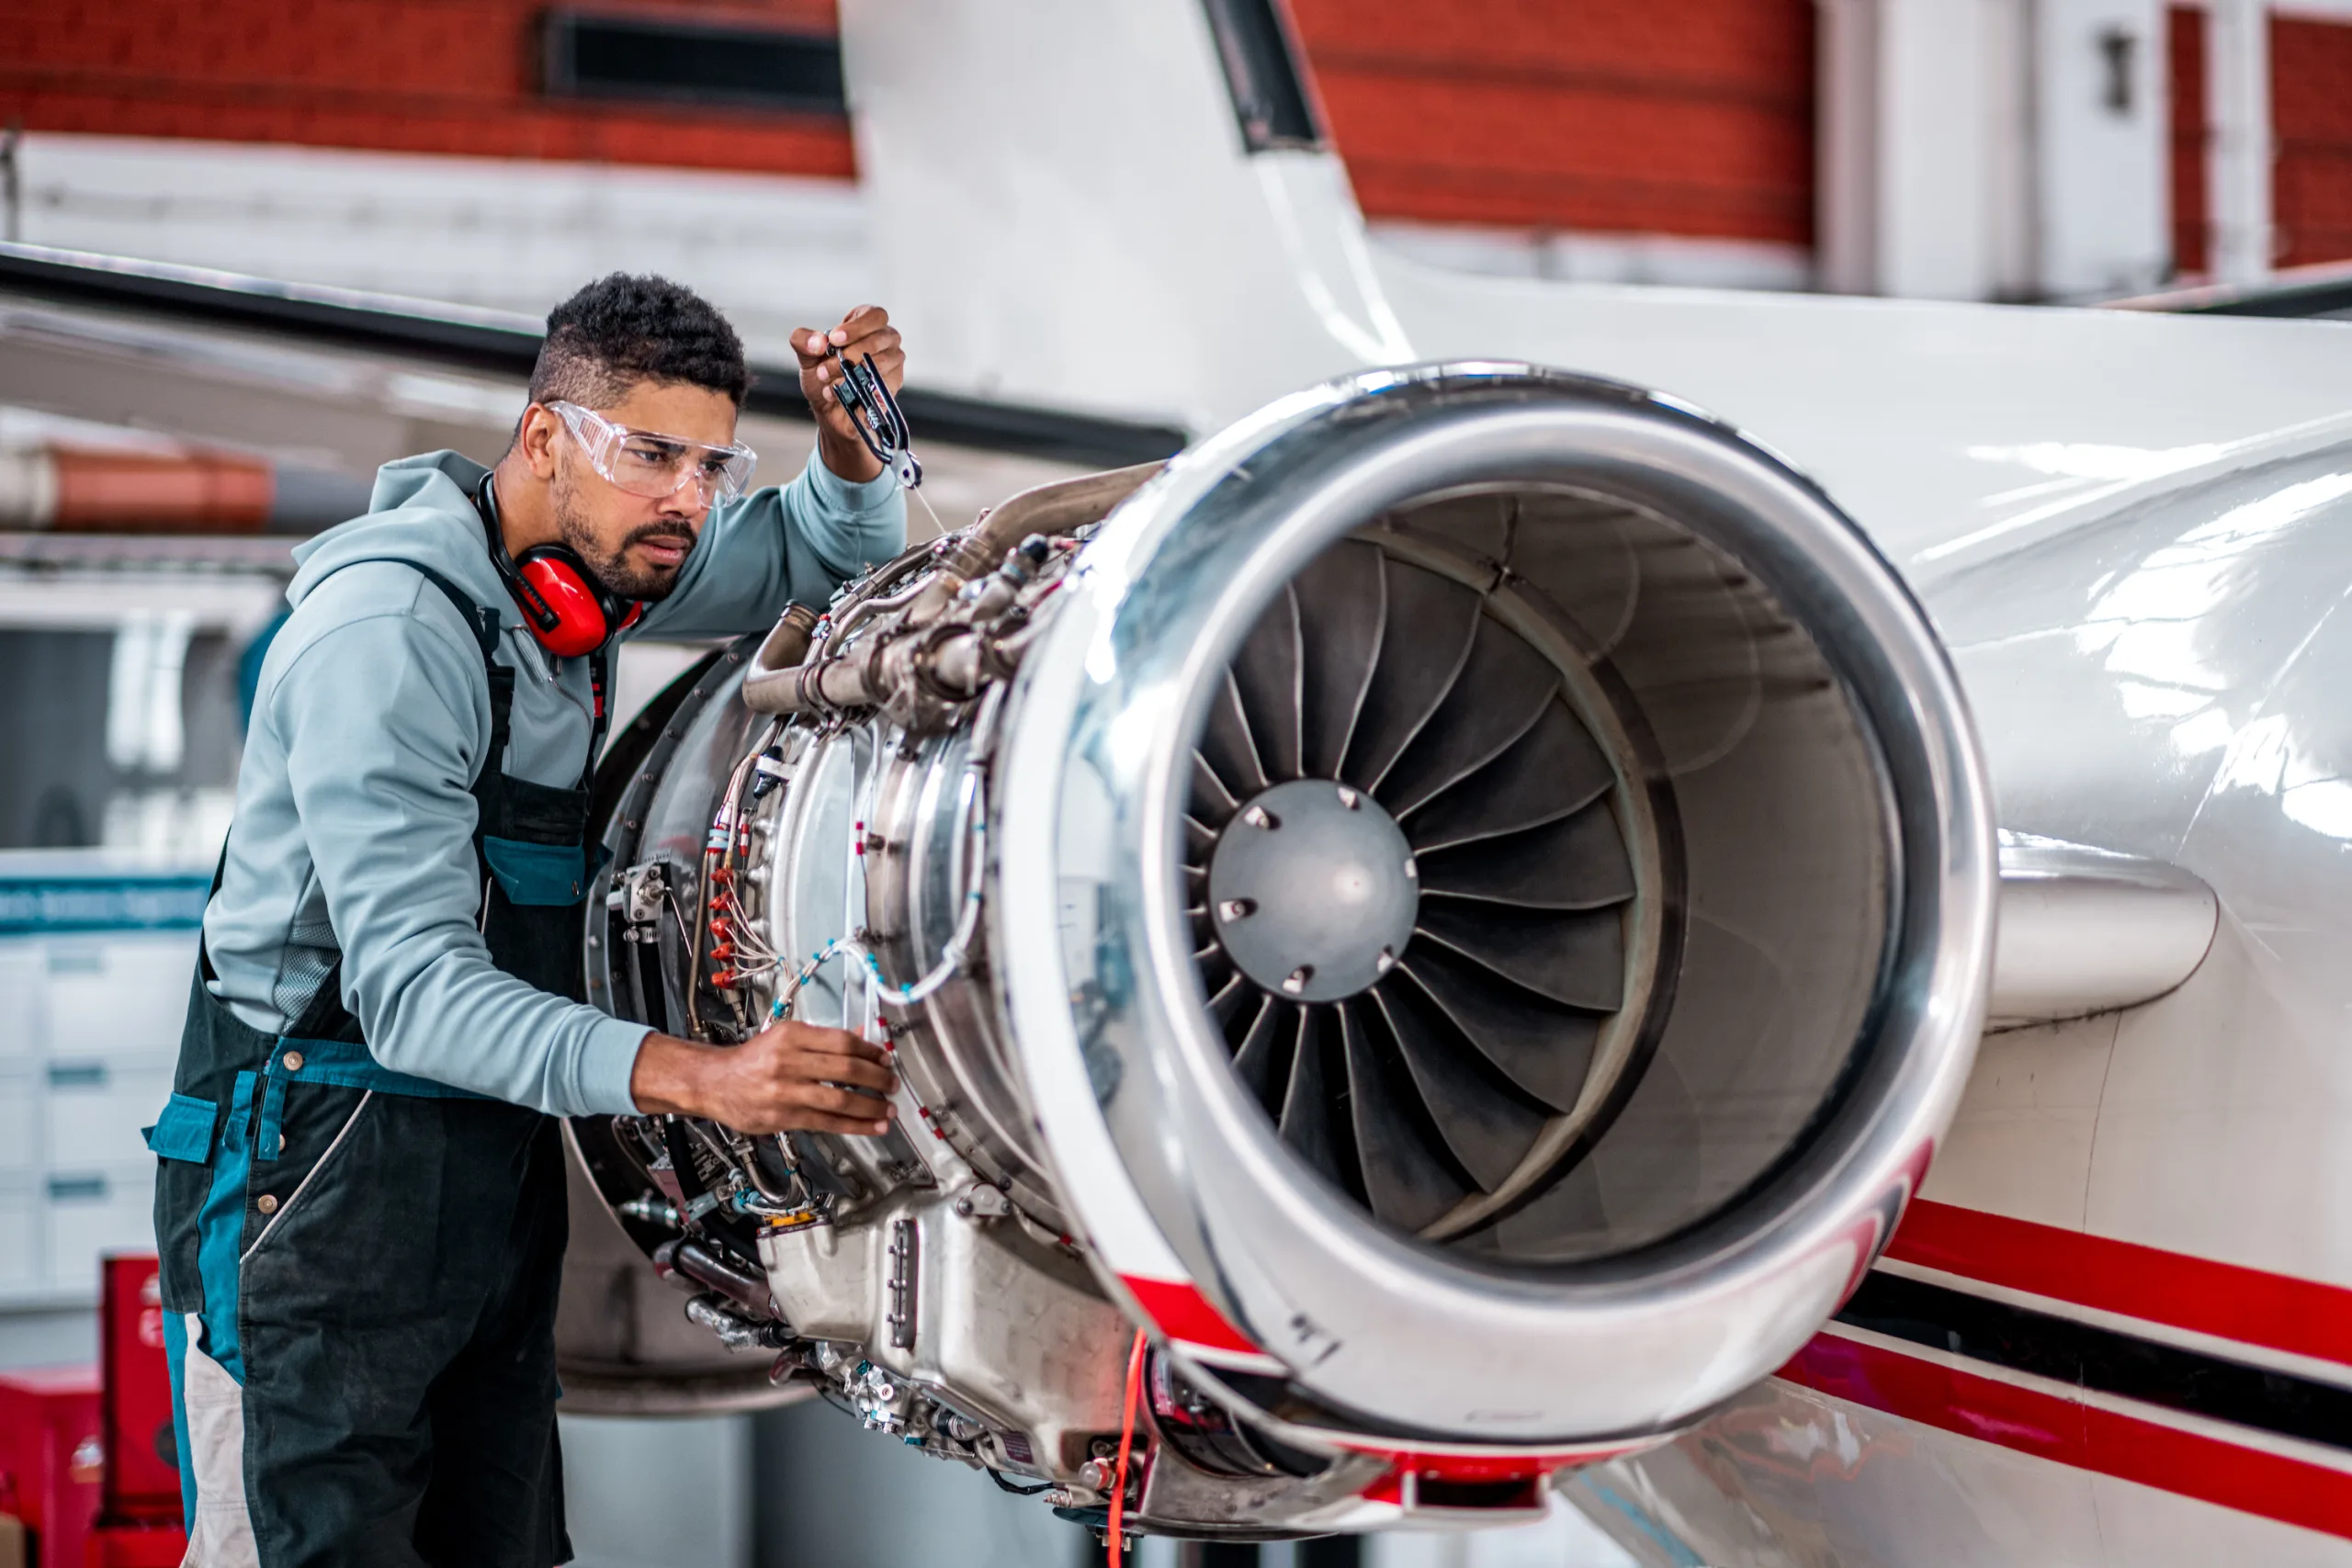 Aircraft mechanic inspecting and checking the technology of a jet engine in the hangar at the airport